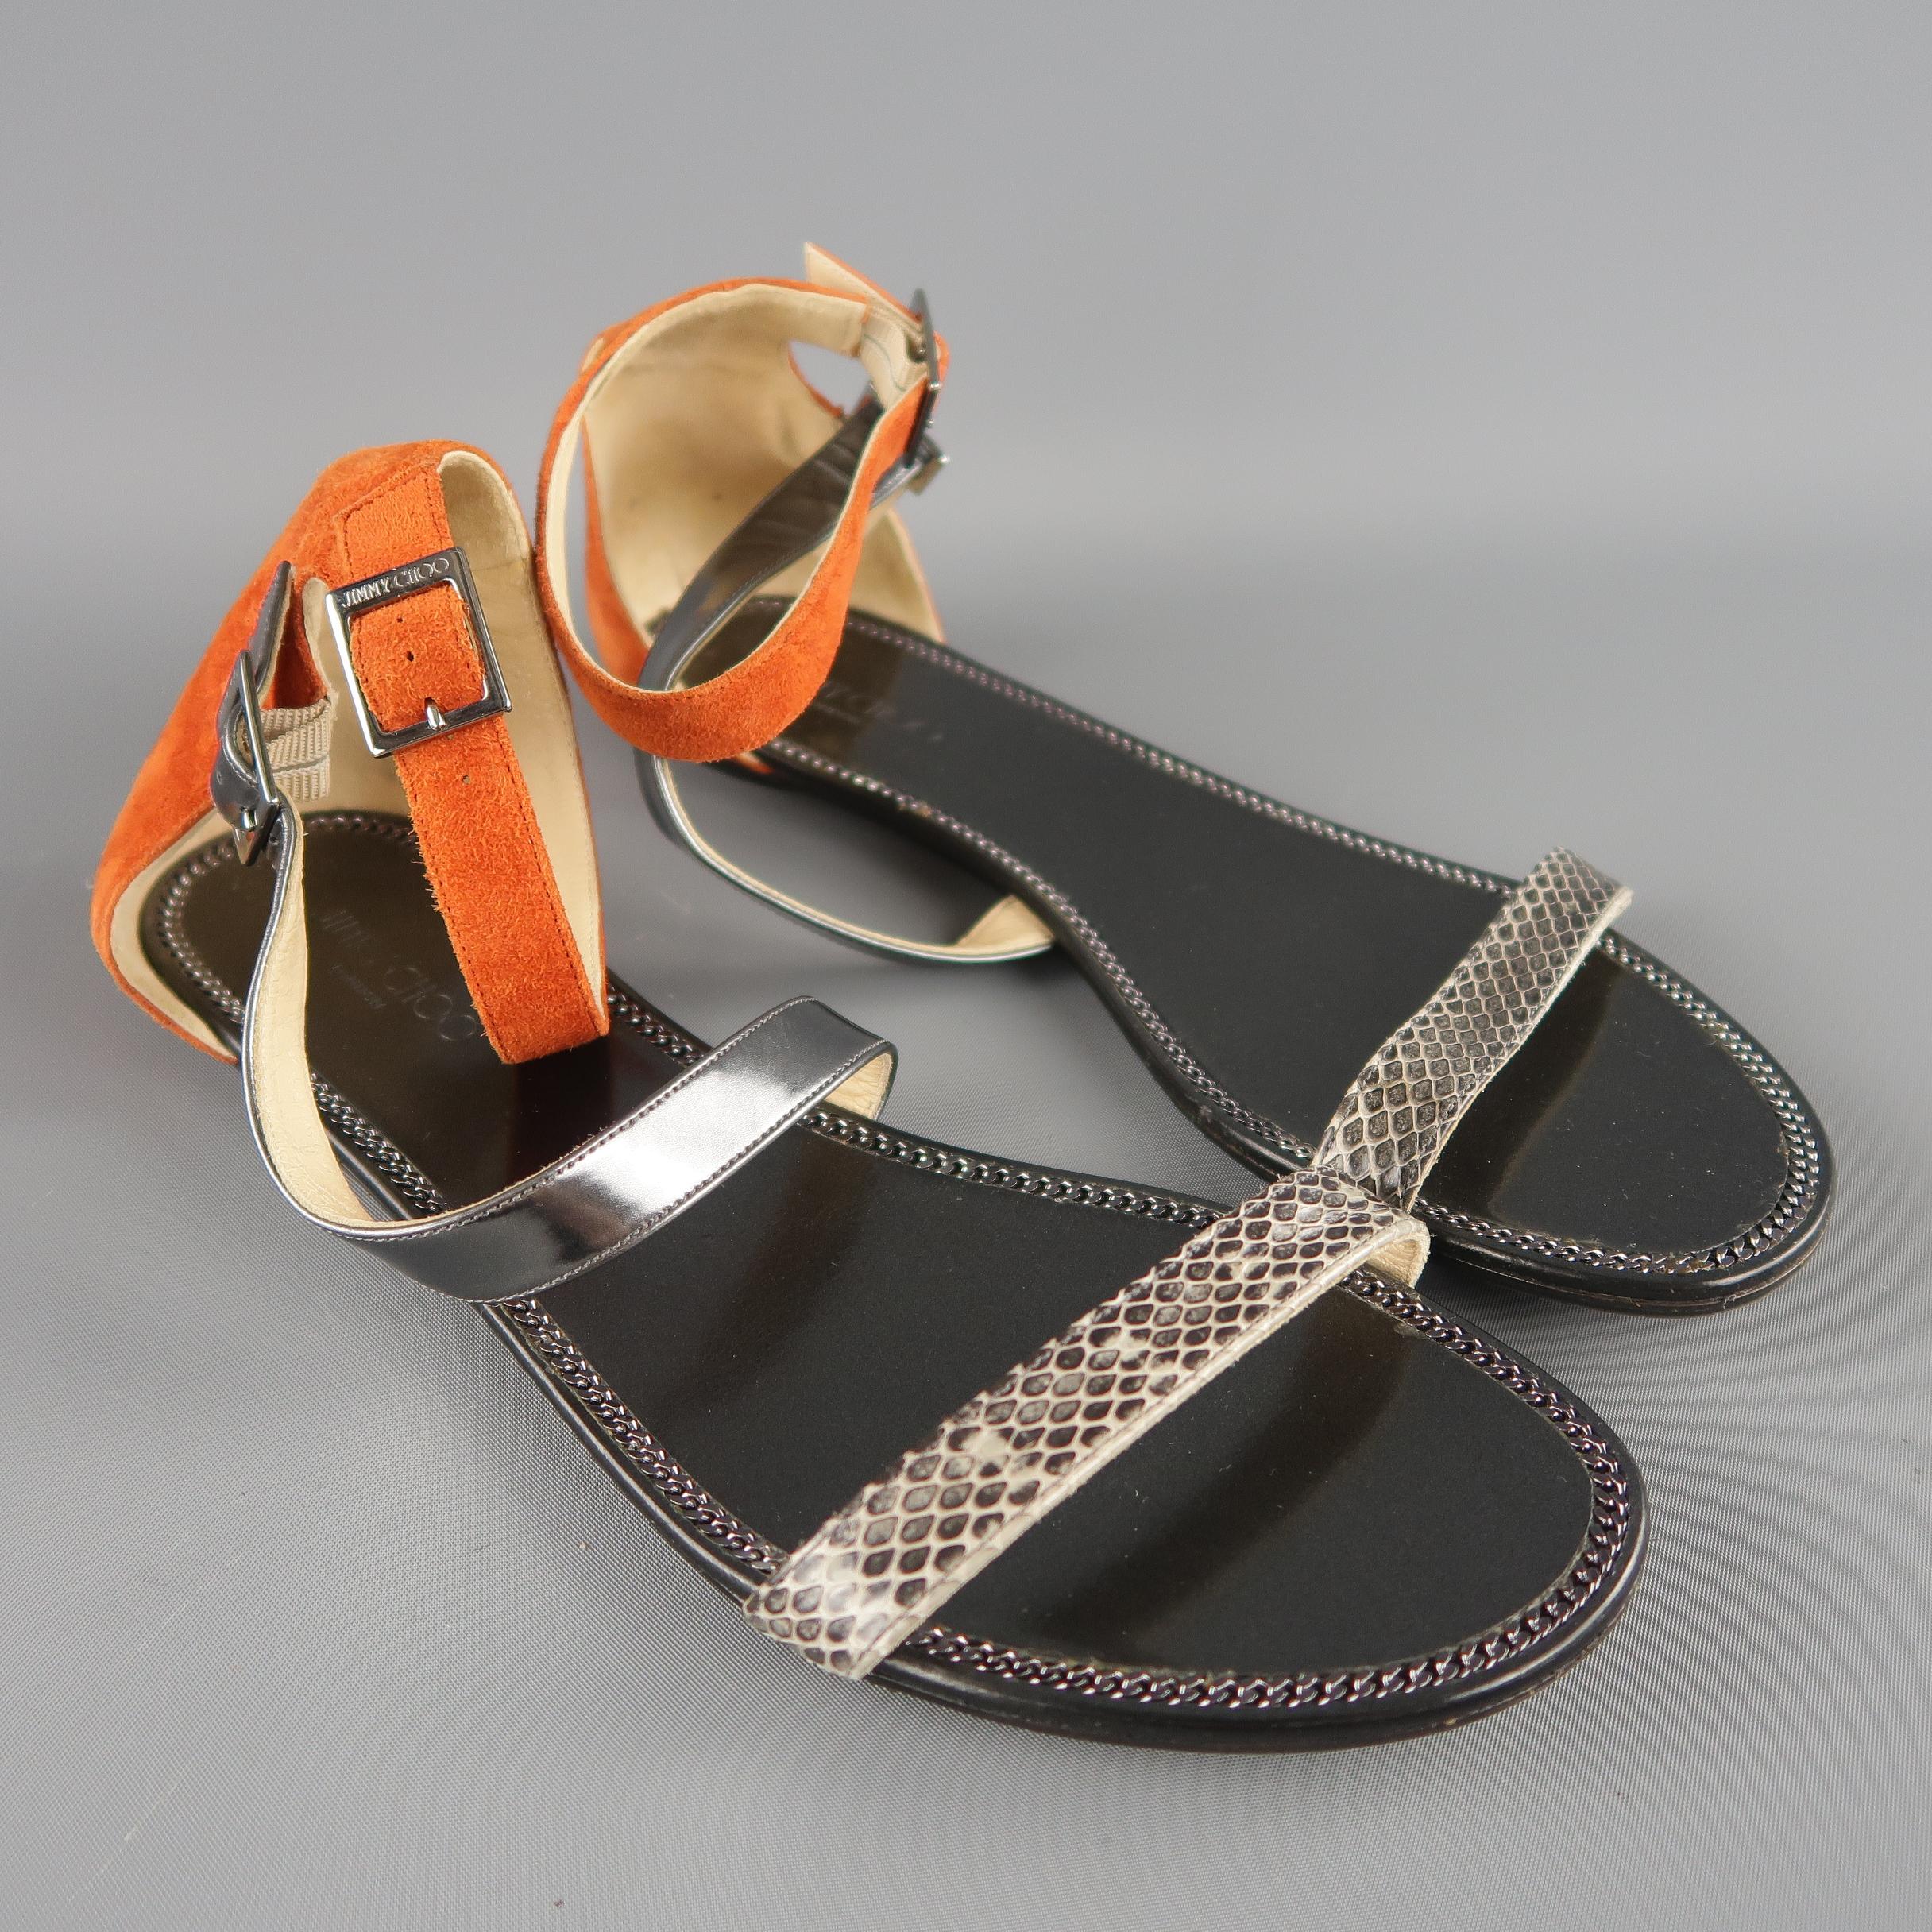 JIMMY CHOO sandals feature an orange suede heel with ankle strap, metallic smoke silver leather diagonal strap, and gray snakeskin toe strap. Made in Spain.
 
New without Tags.
Marked: IT 40